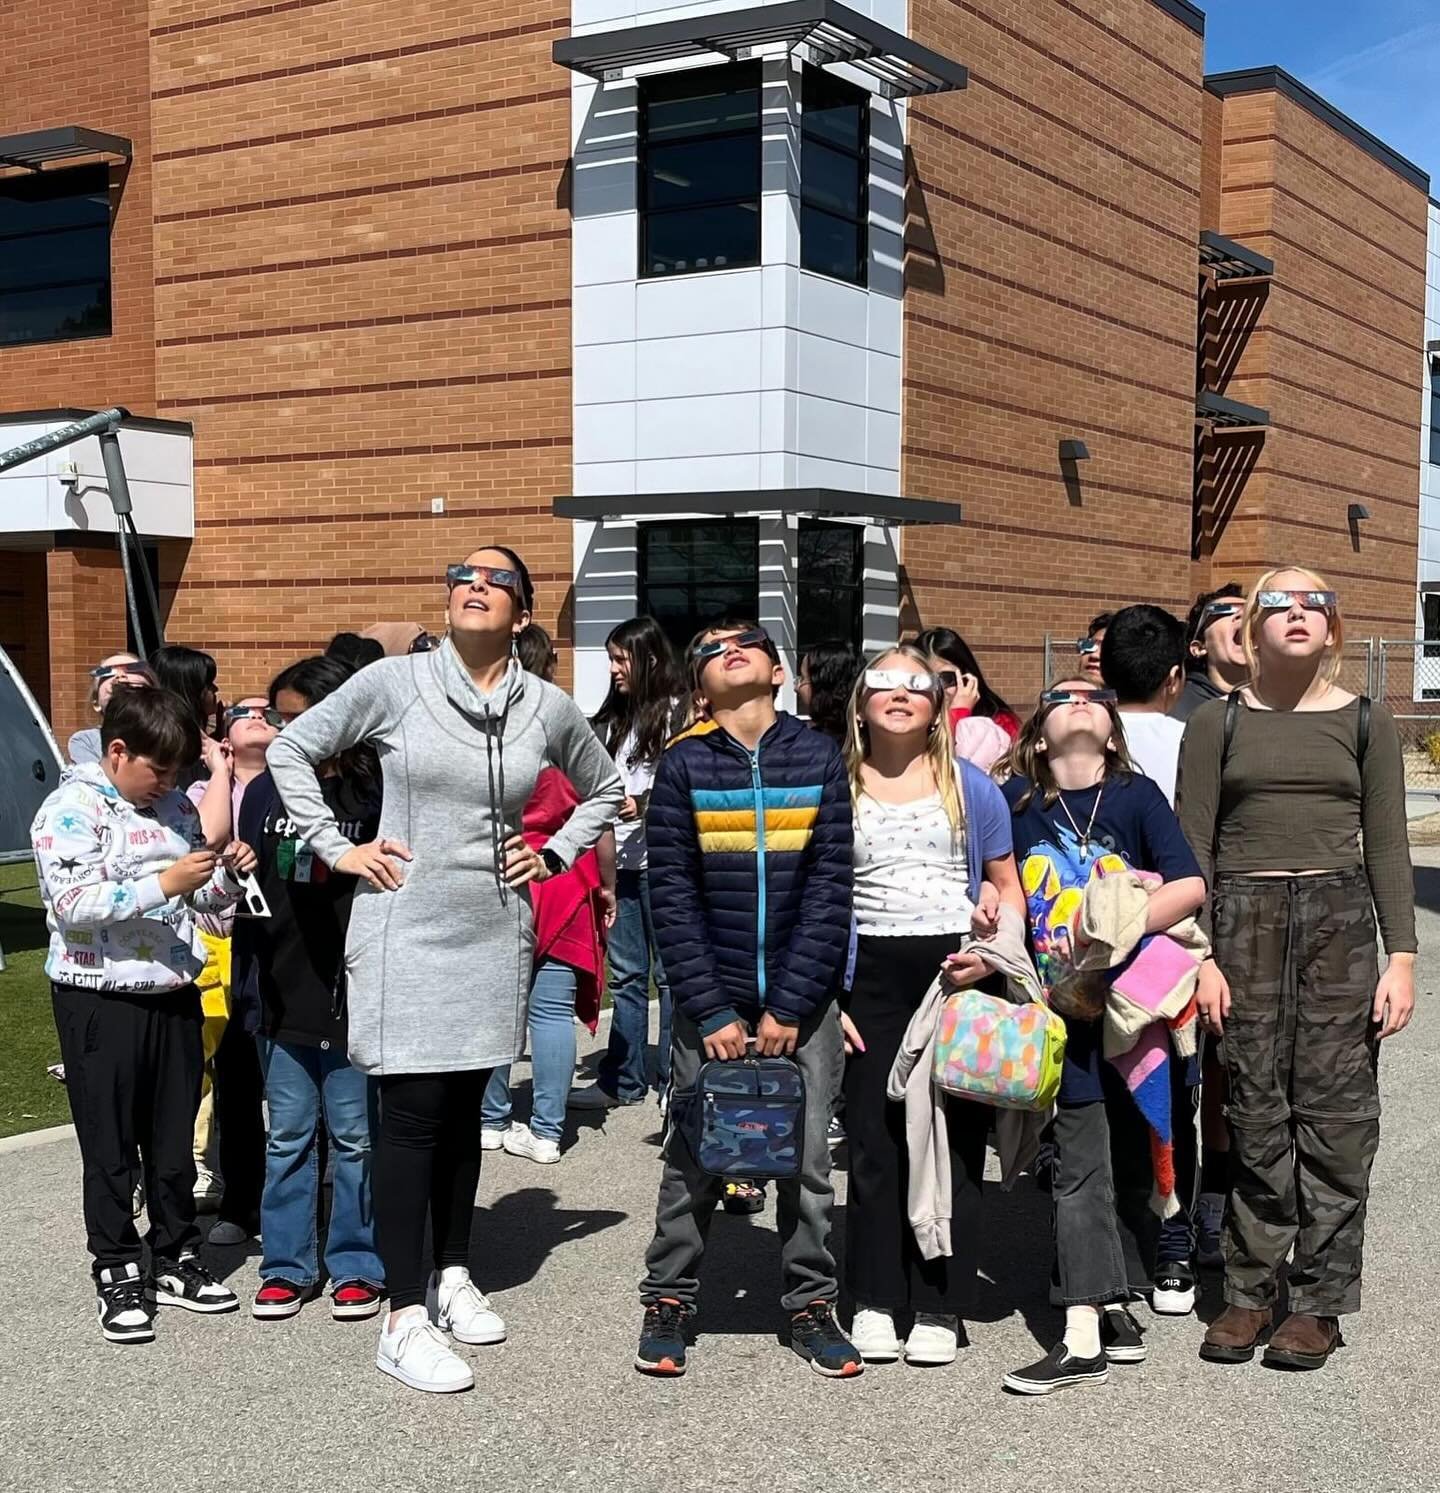 I&rsquo;m so glad to be back at school and with the kids. As part of my job, I get to help plan for STEM learning with the students.

Thanks to a grant from @pwrengineers, we were able to provide solar eclipse glasses for each student. It was awesome